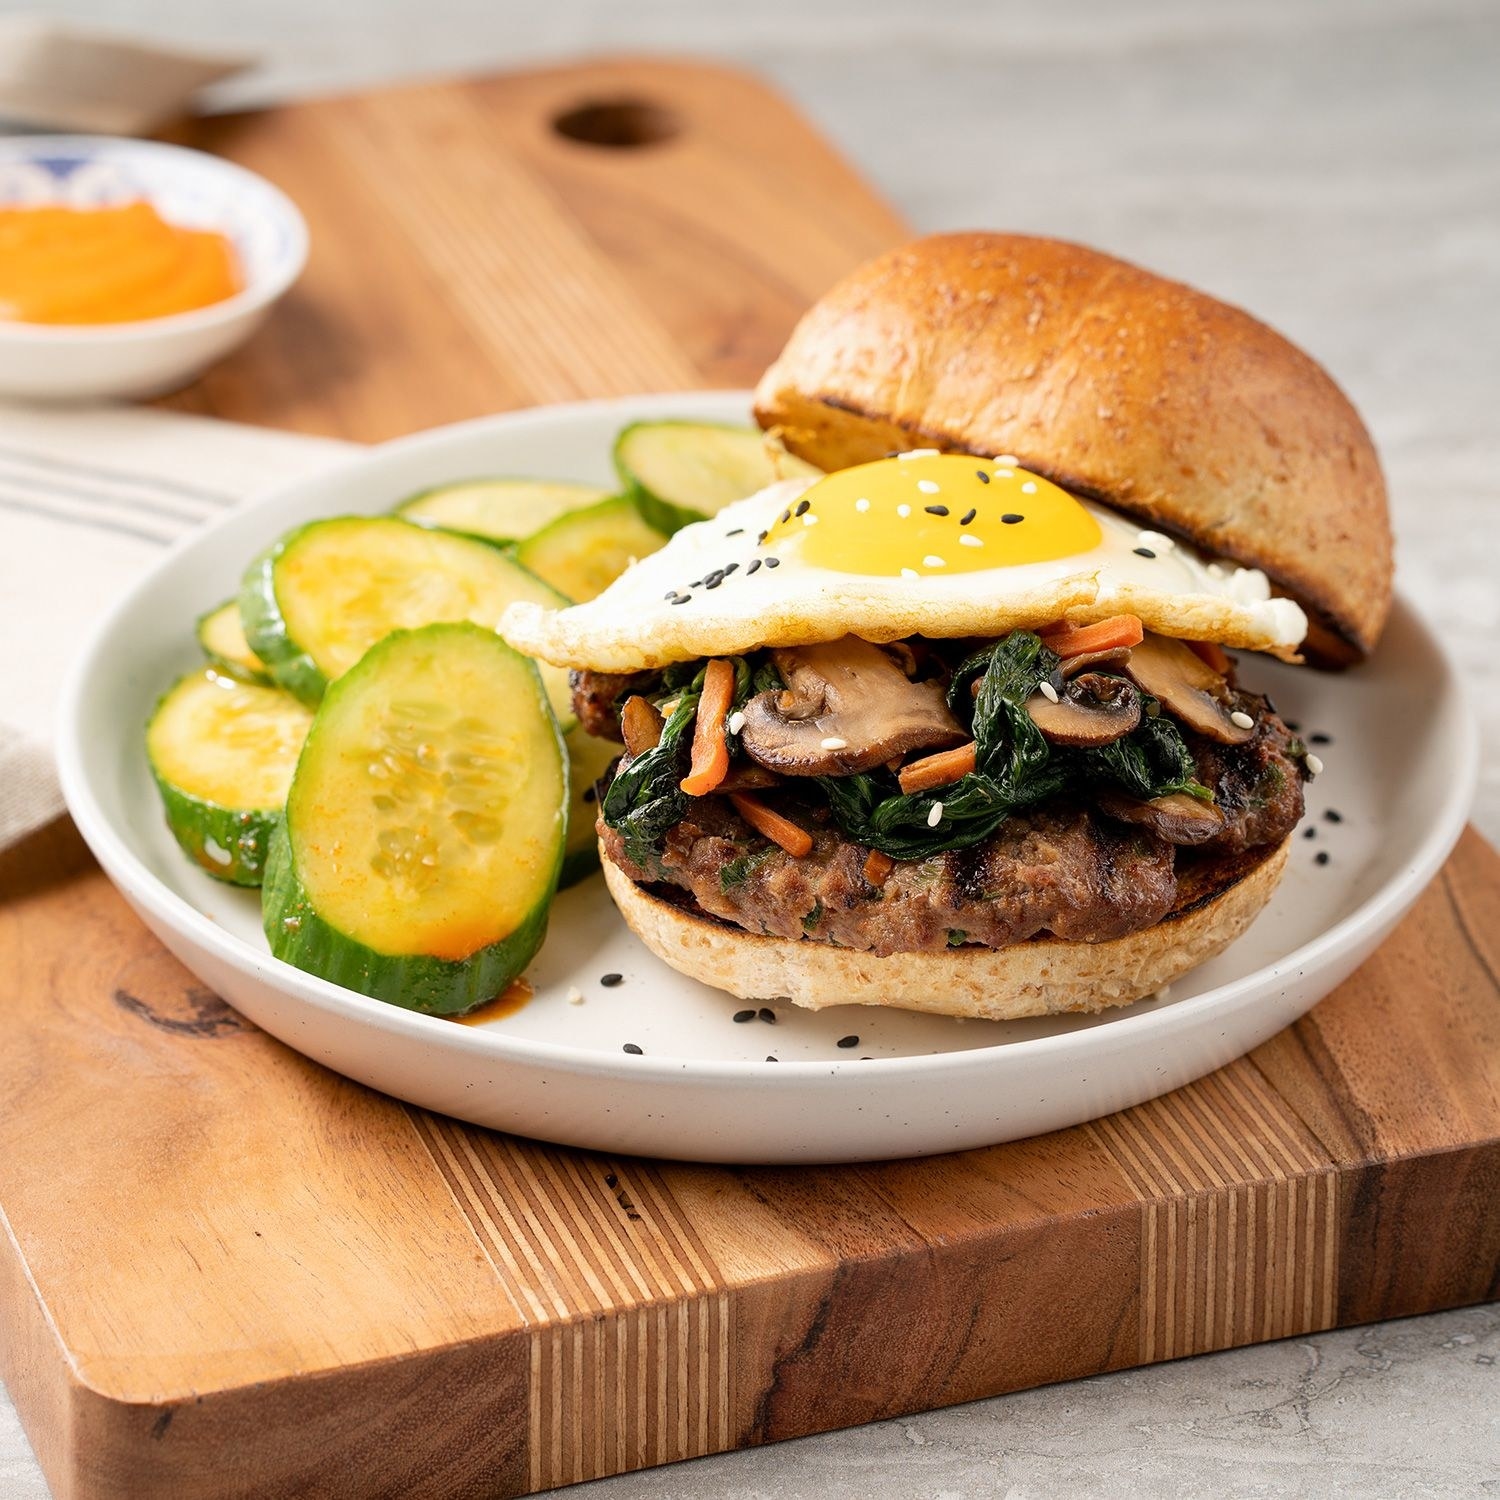 A Korean-spiced burger patty topped with a runny fried egg and served with a cucumber salad